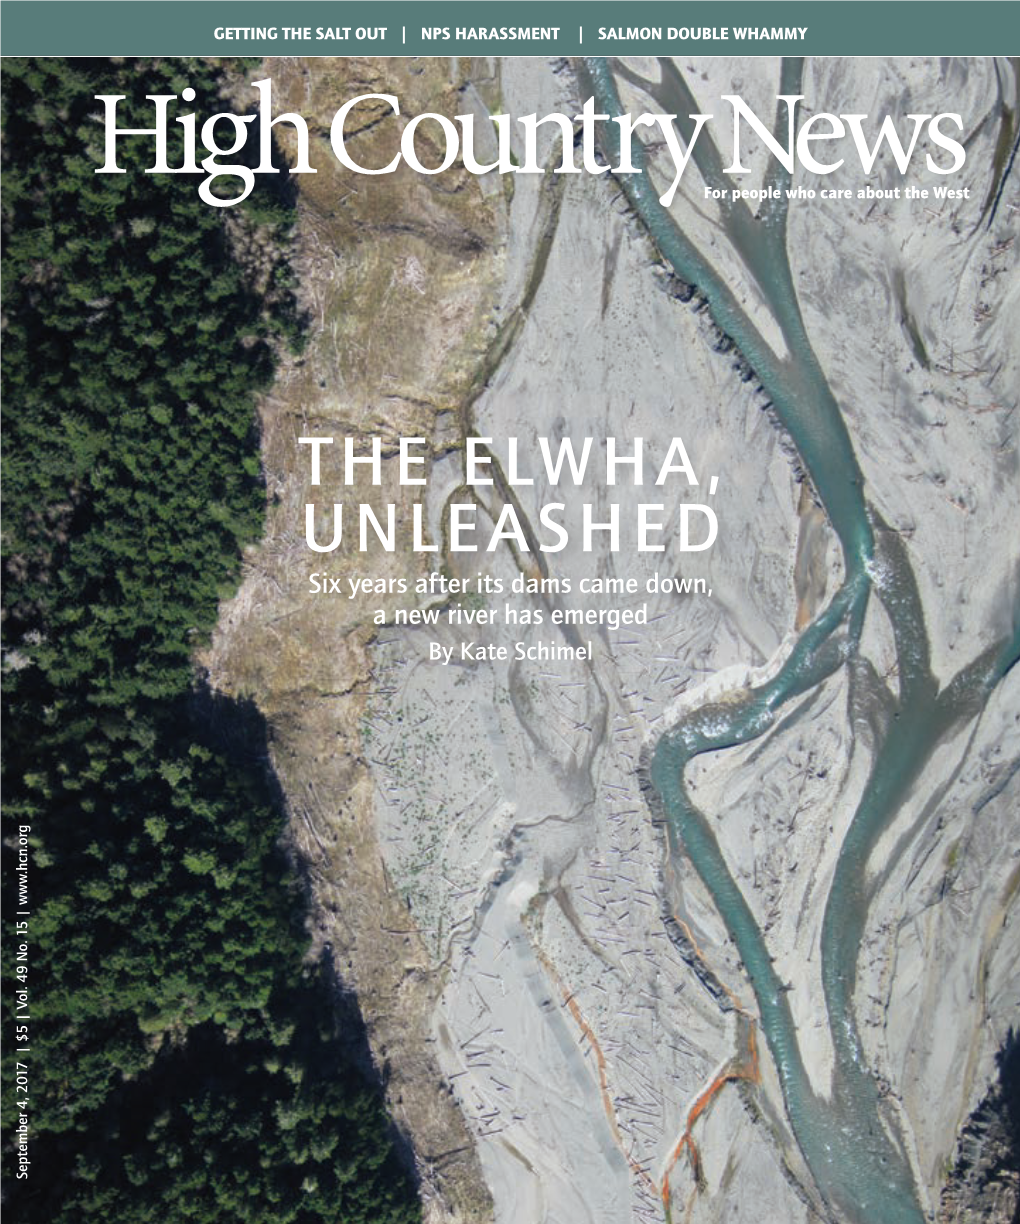 The Elwha, Unleashed Six Years After Its Dams Came Down, a New River Has Emerged by Kate Schimel 5 | O